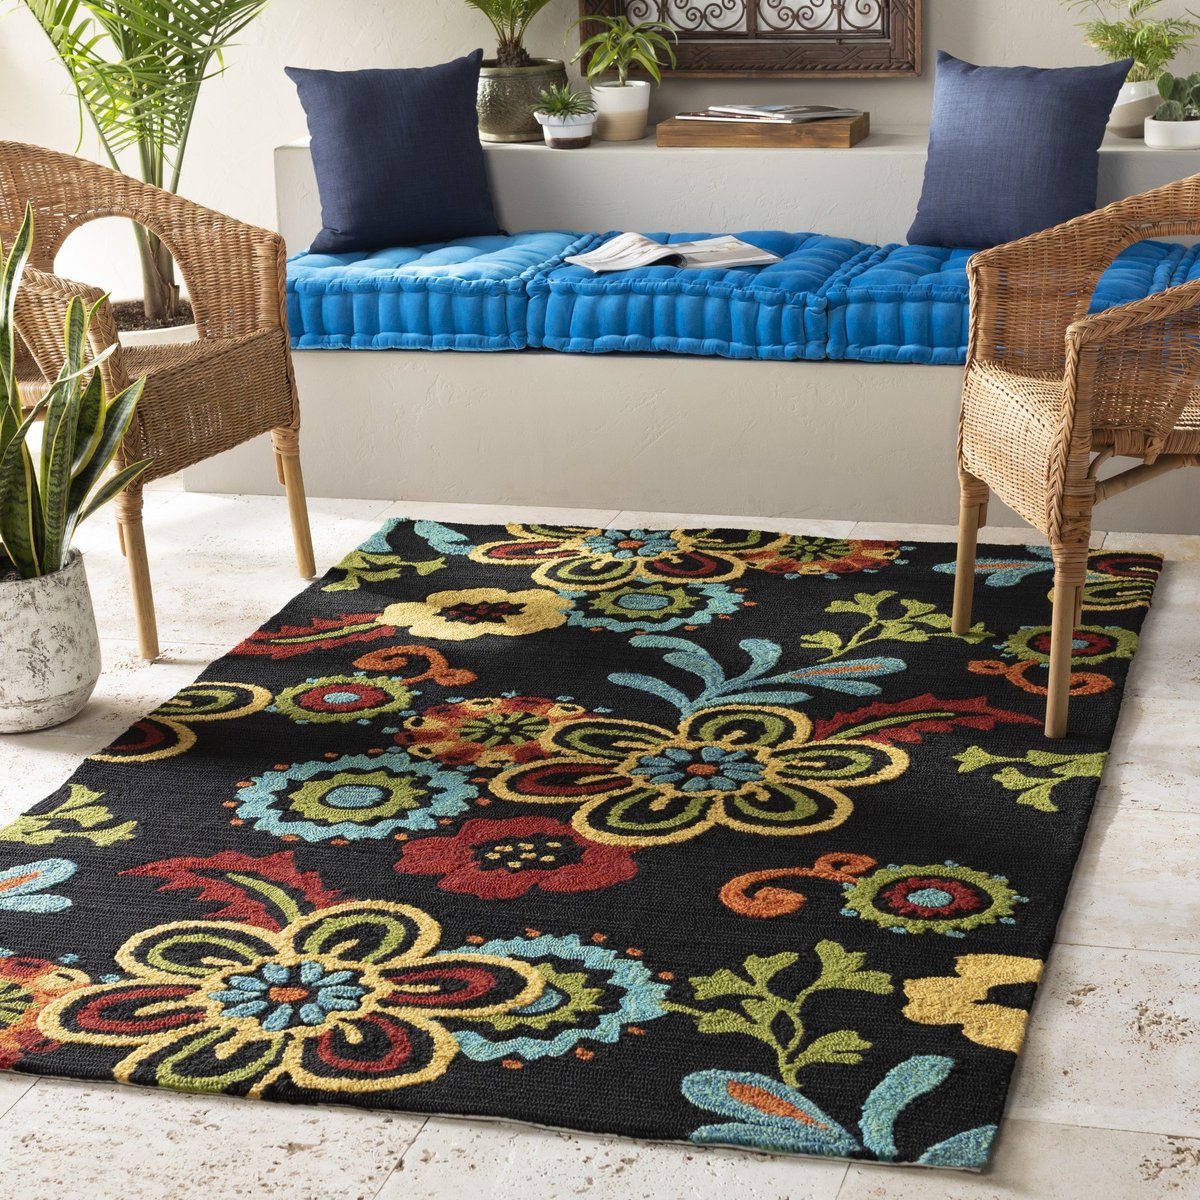 Rugs.com - 4' x 6' Everyday Performance Rug Pad 1/4 Thick Felt & Non-Slip  Backing Perfect for Any Flooring Surface